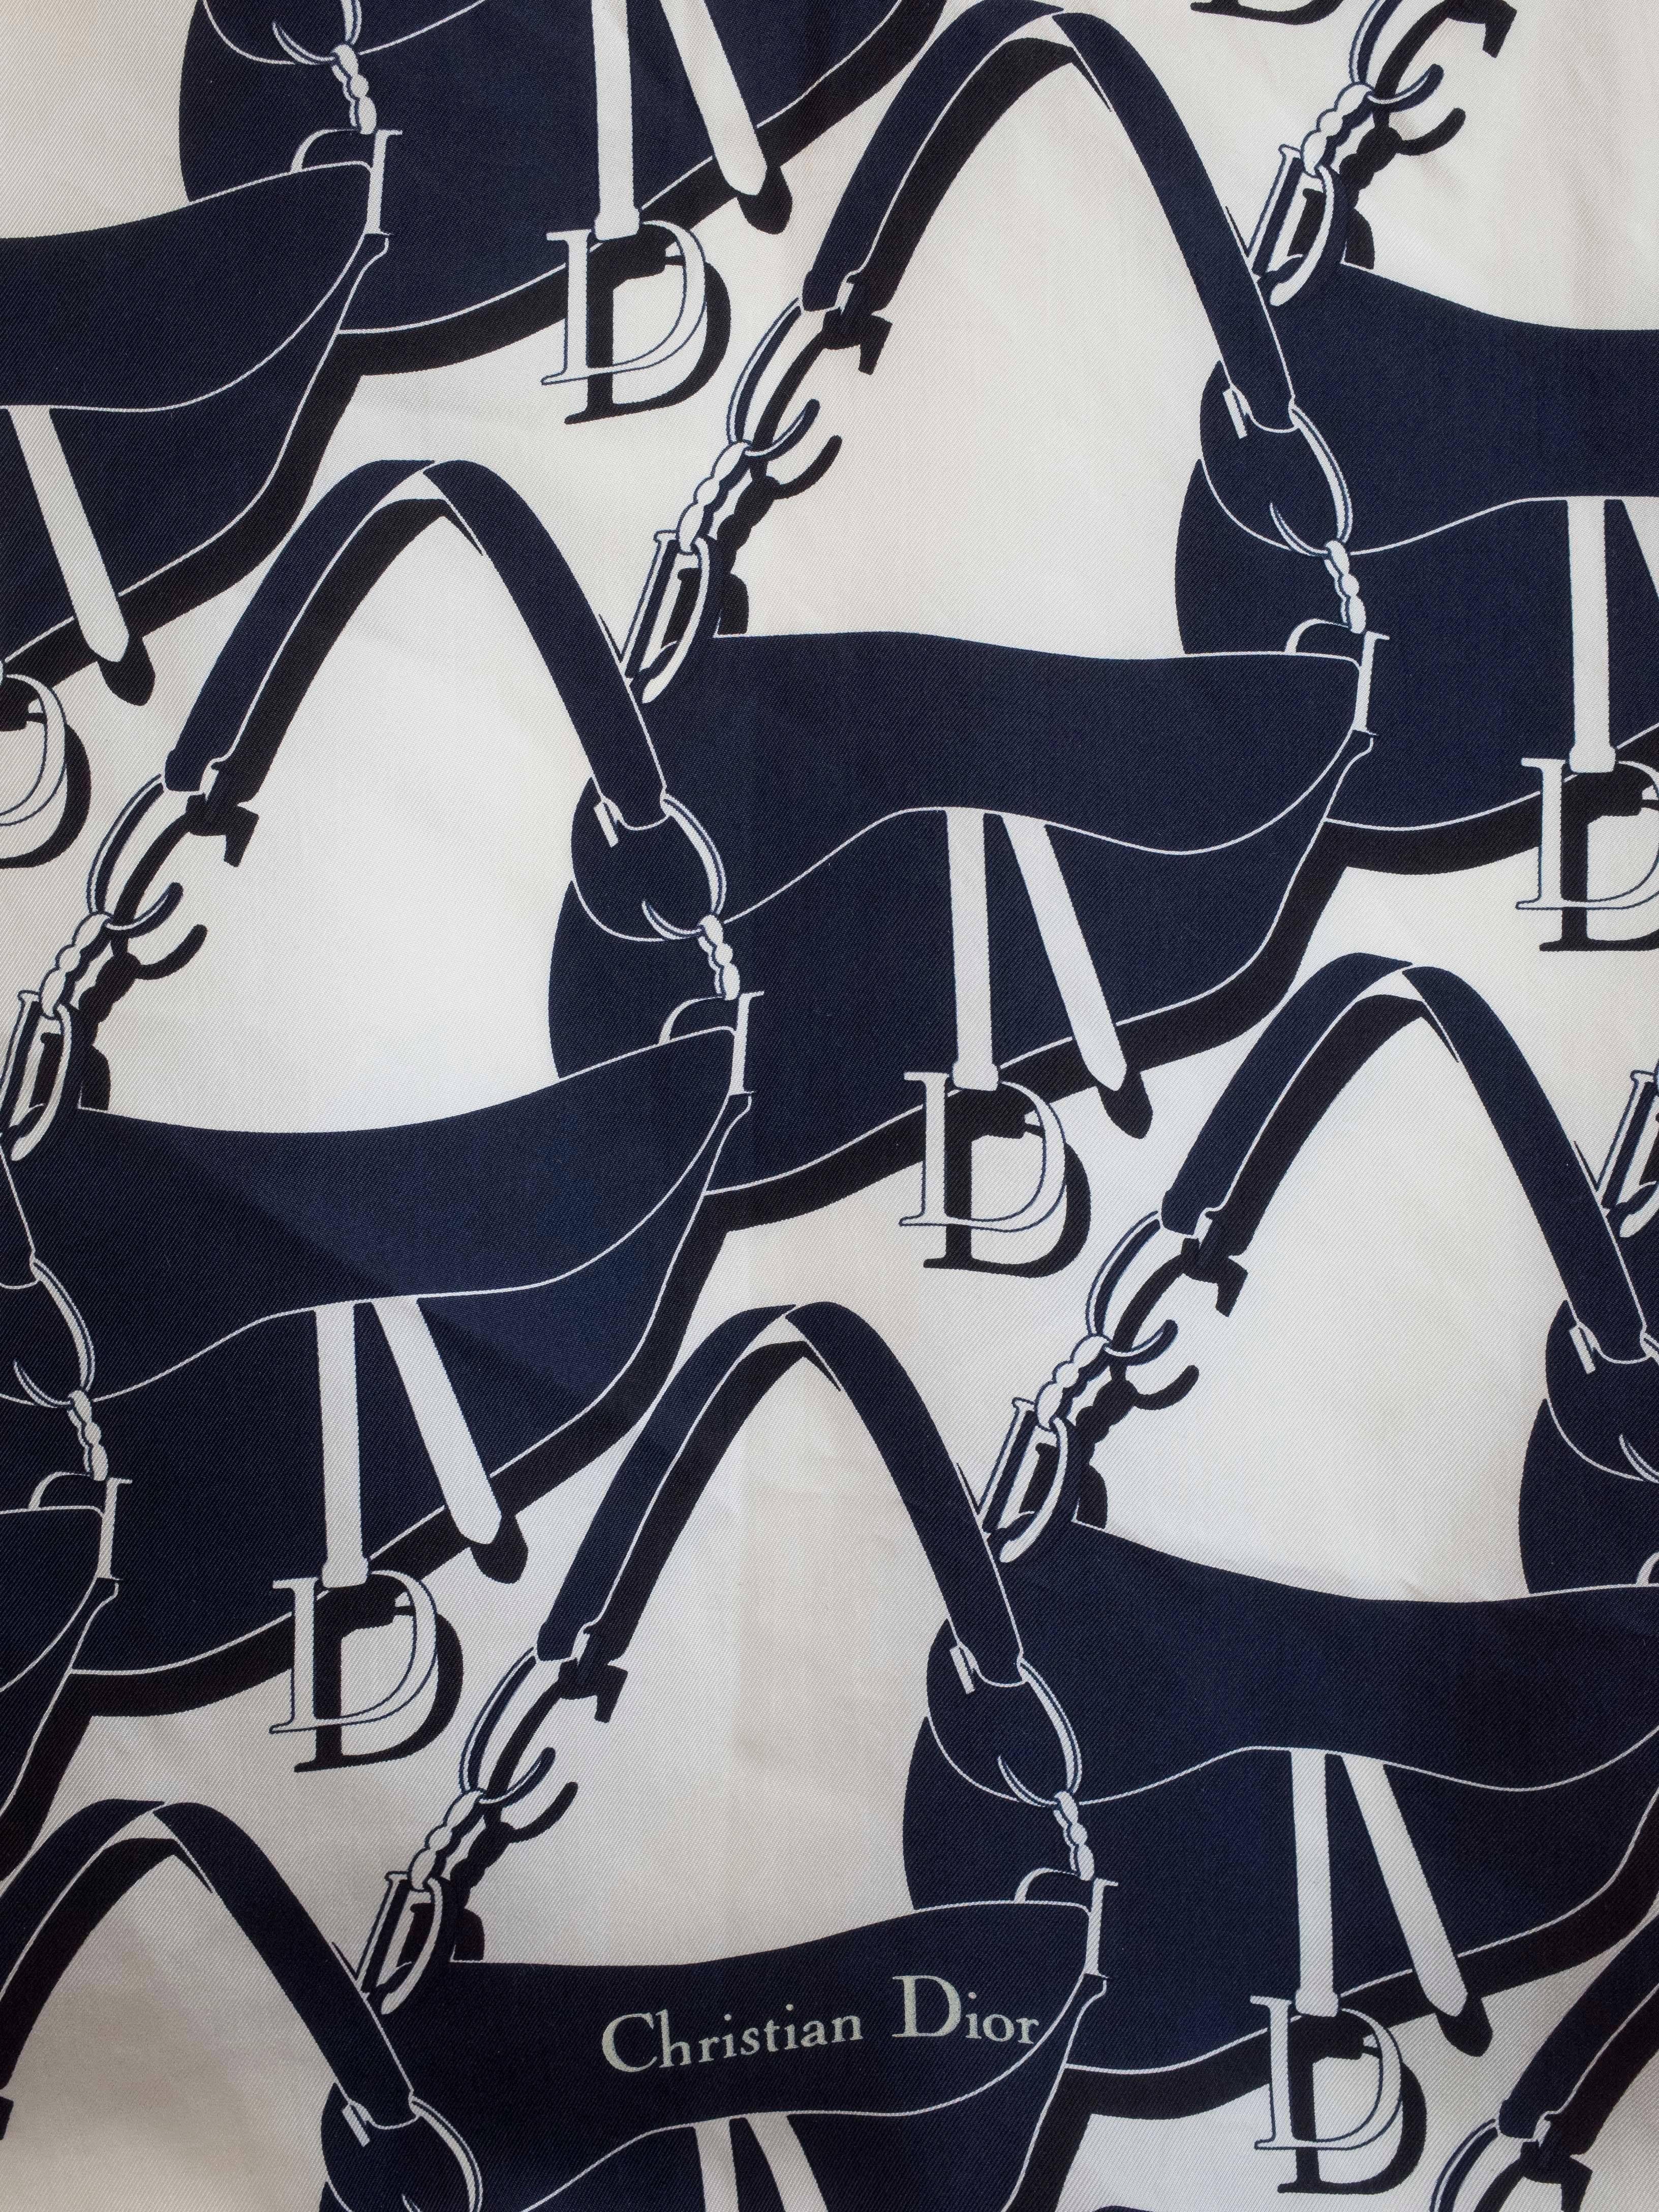 Silk scarf by Christian Dior. 
Features a navy and white over-all print of the iconic saddle bag.
Measures 34” square

